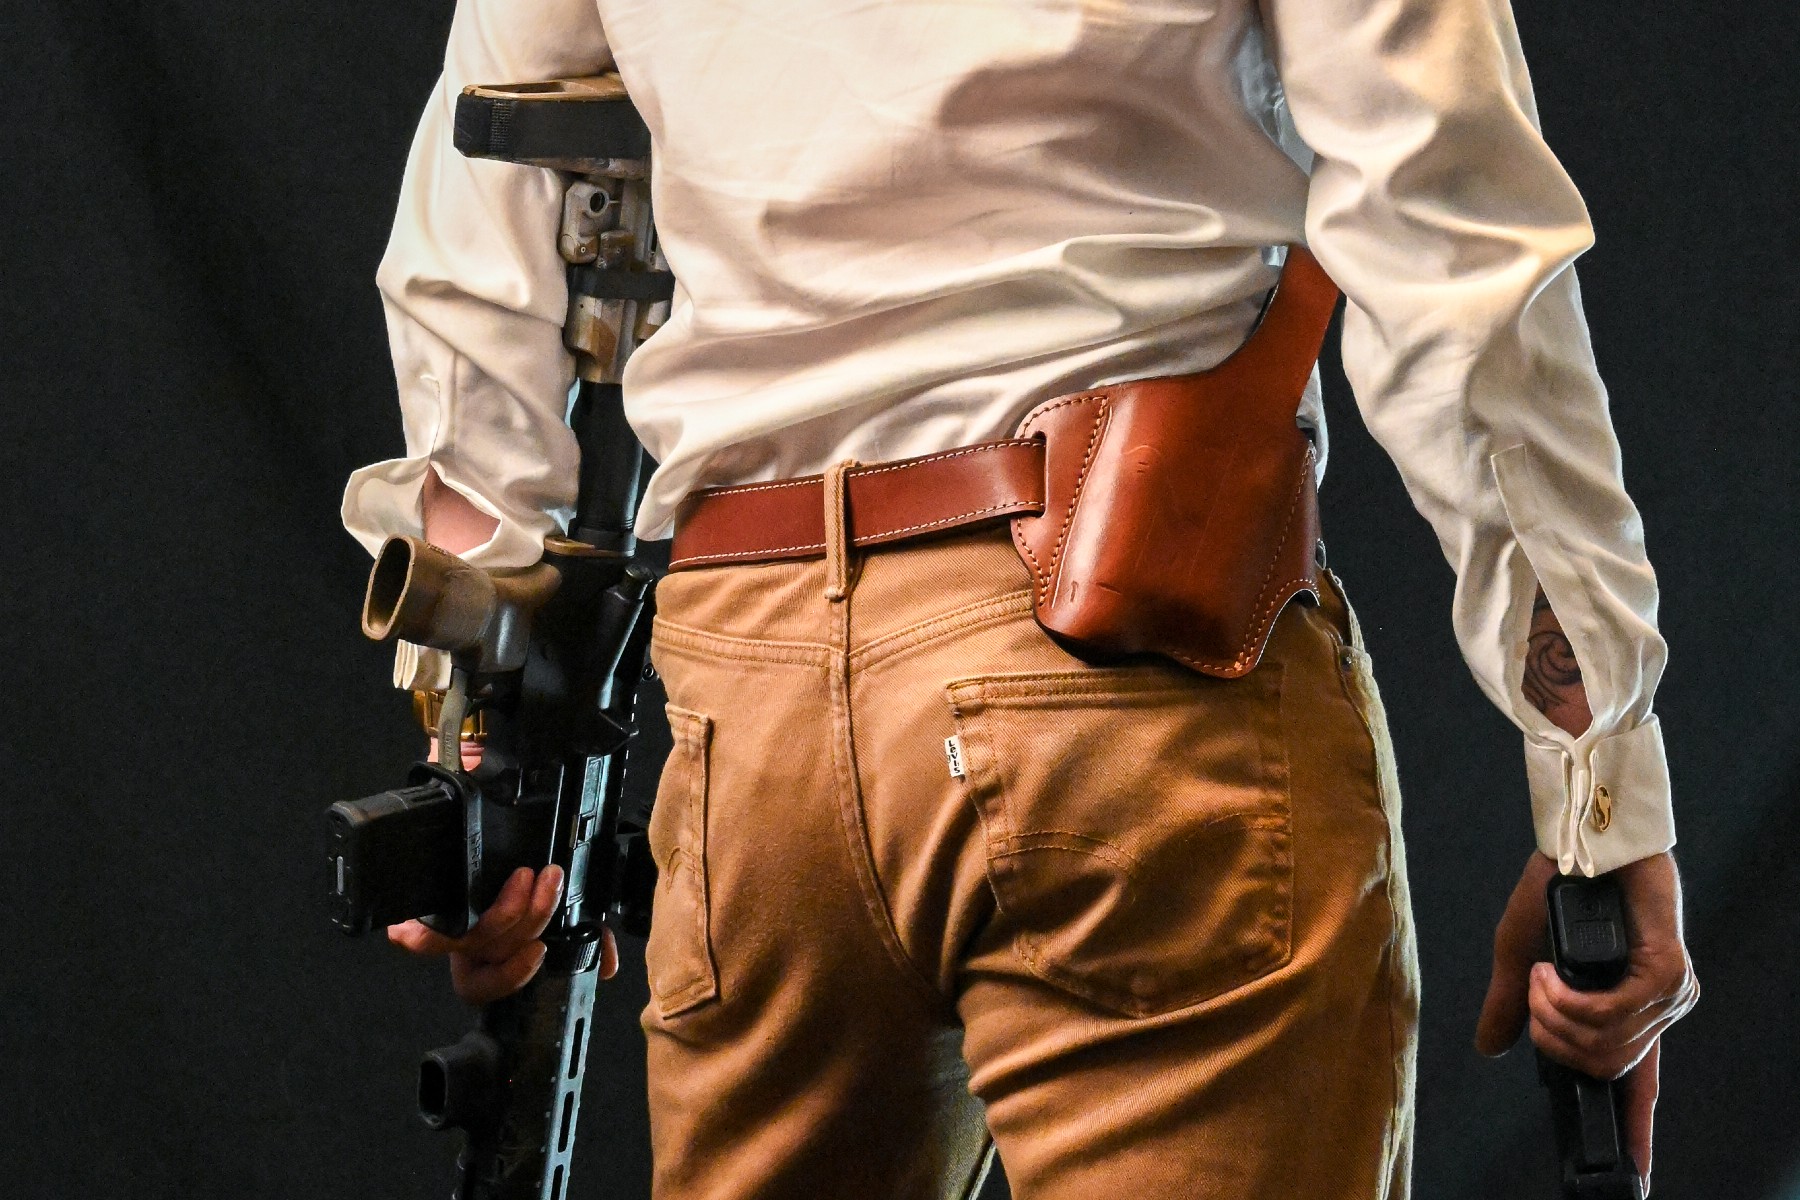 Canted OWB holster